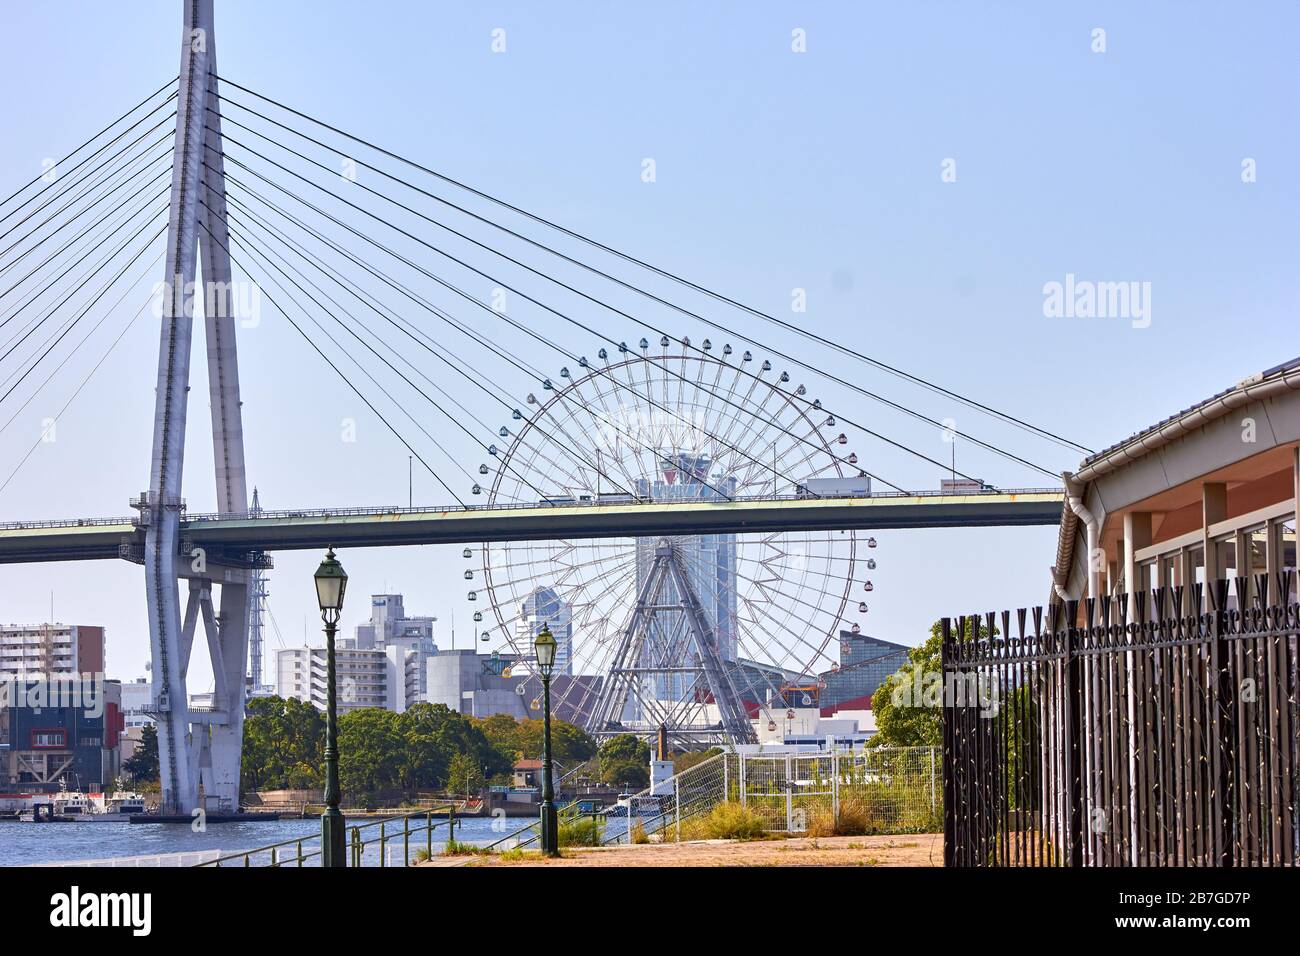 Brifge over the river with ferris wheel in the background Stock Photo